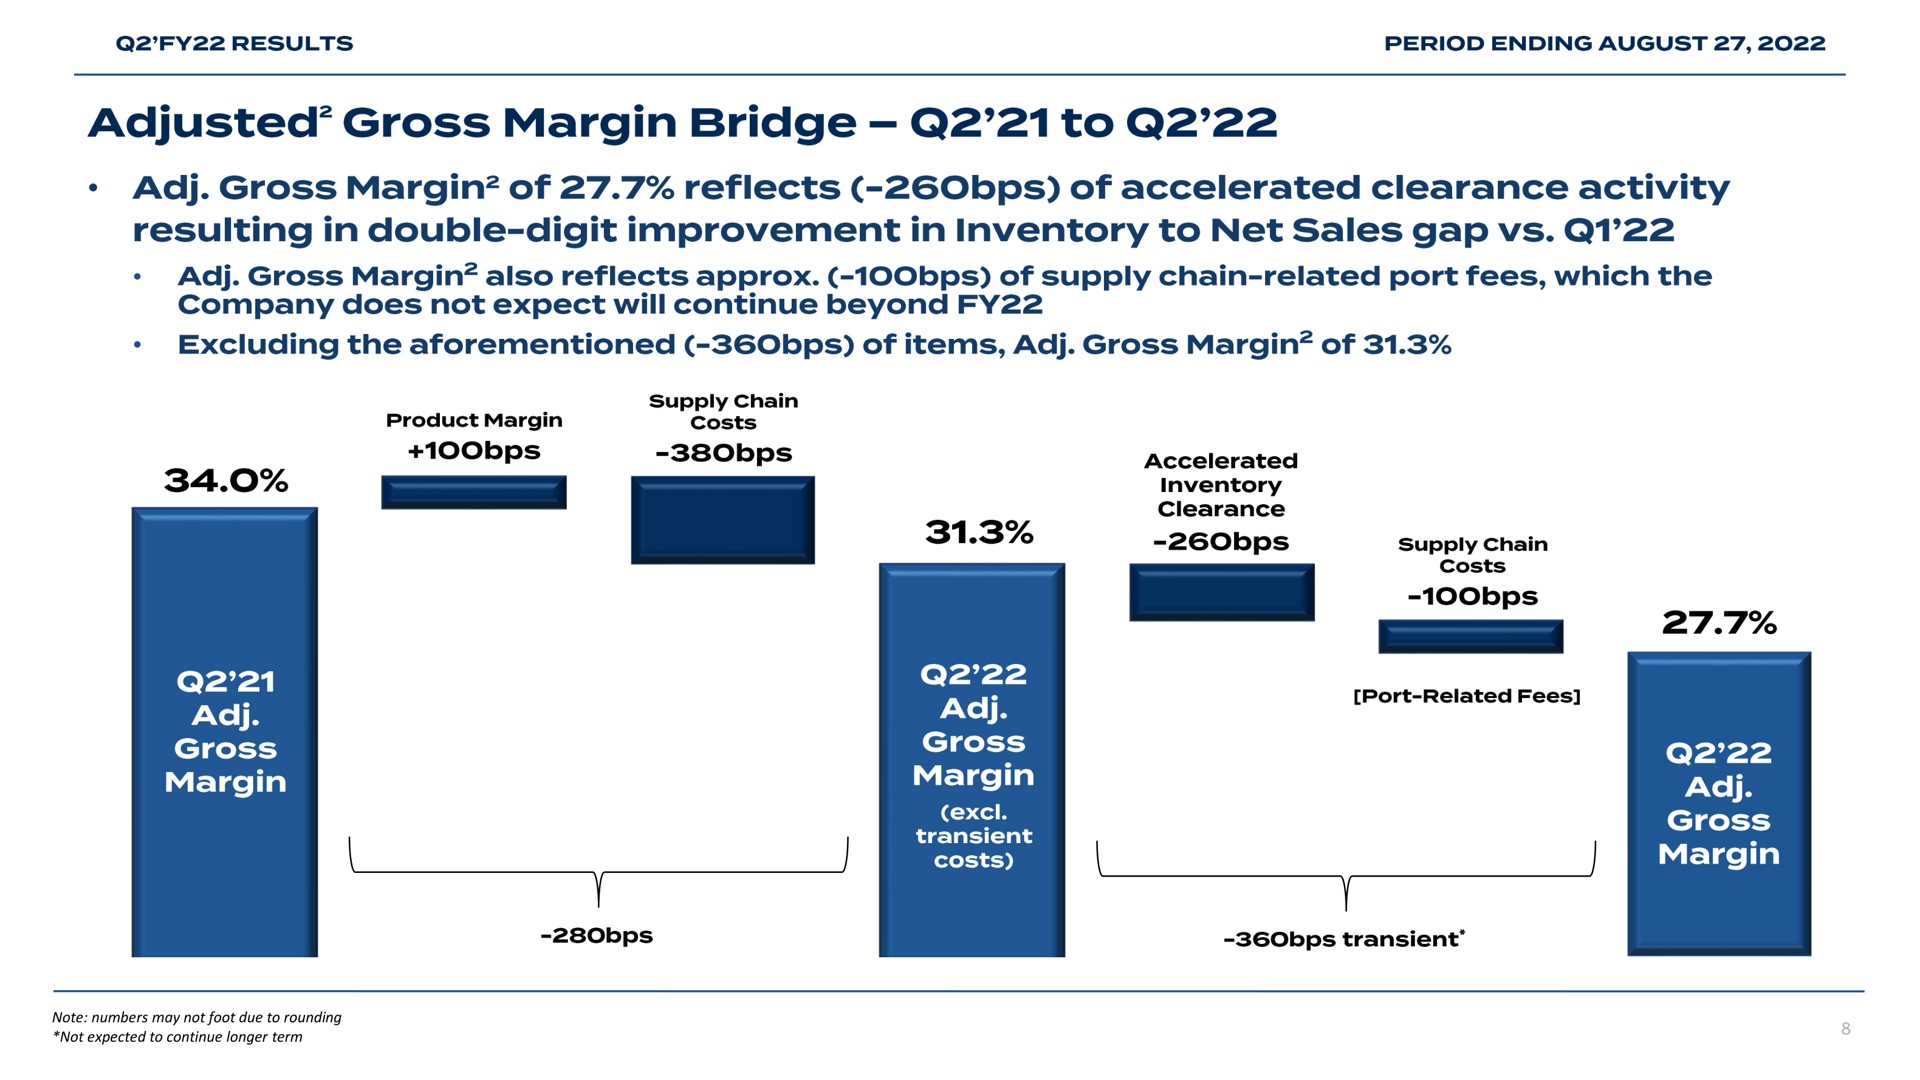 adjusted gross margin bridge to gross margin of reflects go of accelerated clearance activity resulting in double digit improvement in inventory to net sales gap clearance | Bed Bath & Beyond